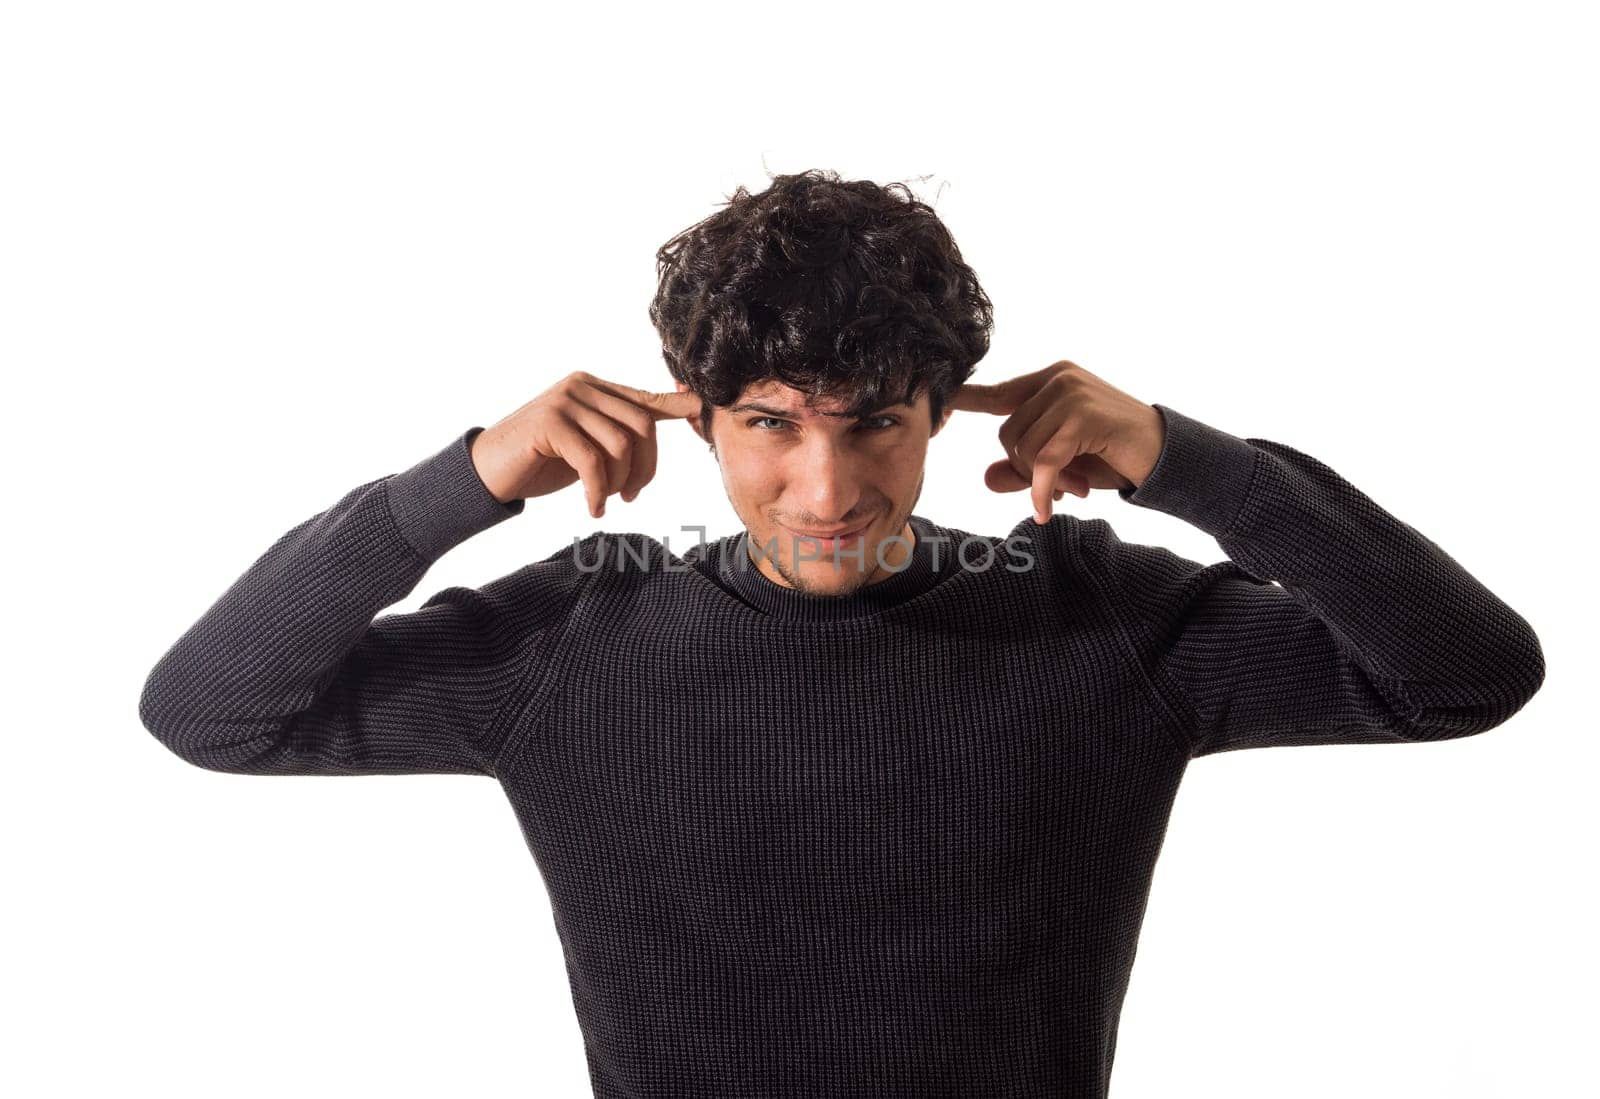 Too much noise: attractive young man covering his ears. A young man with curly hair is seen wearing a black sweater. He is standing against a neutral background, with the focus on his clothing and hair.